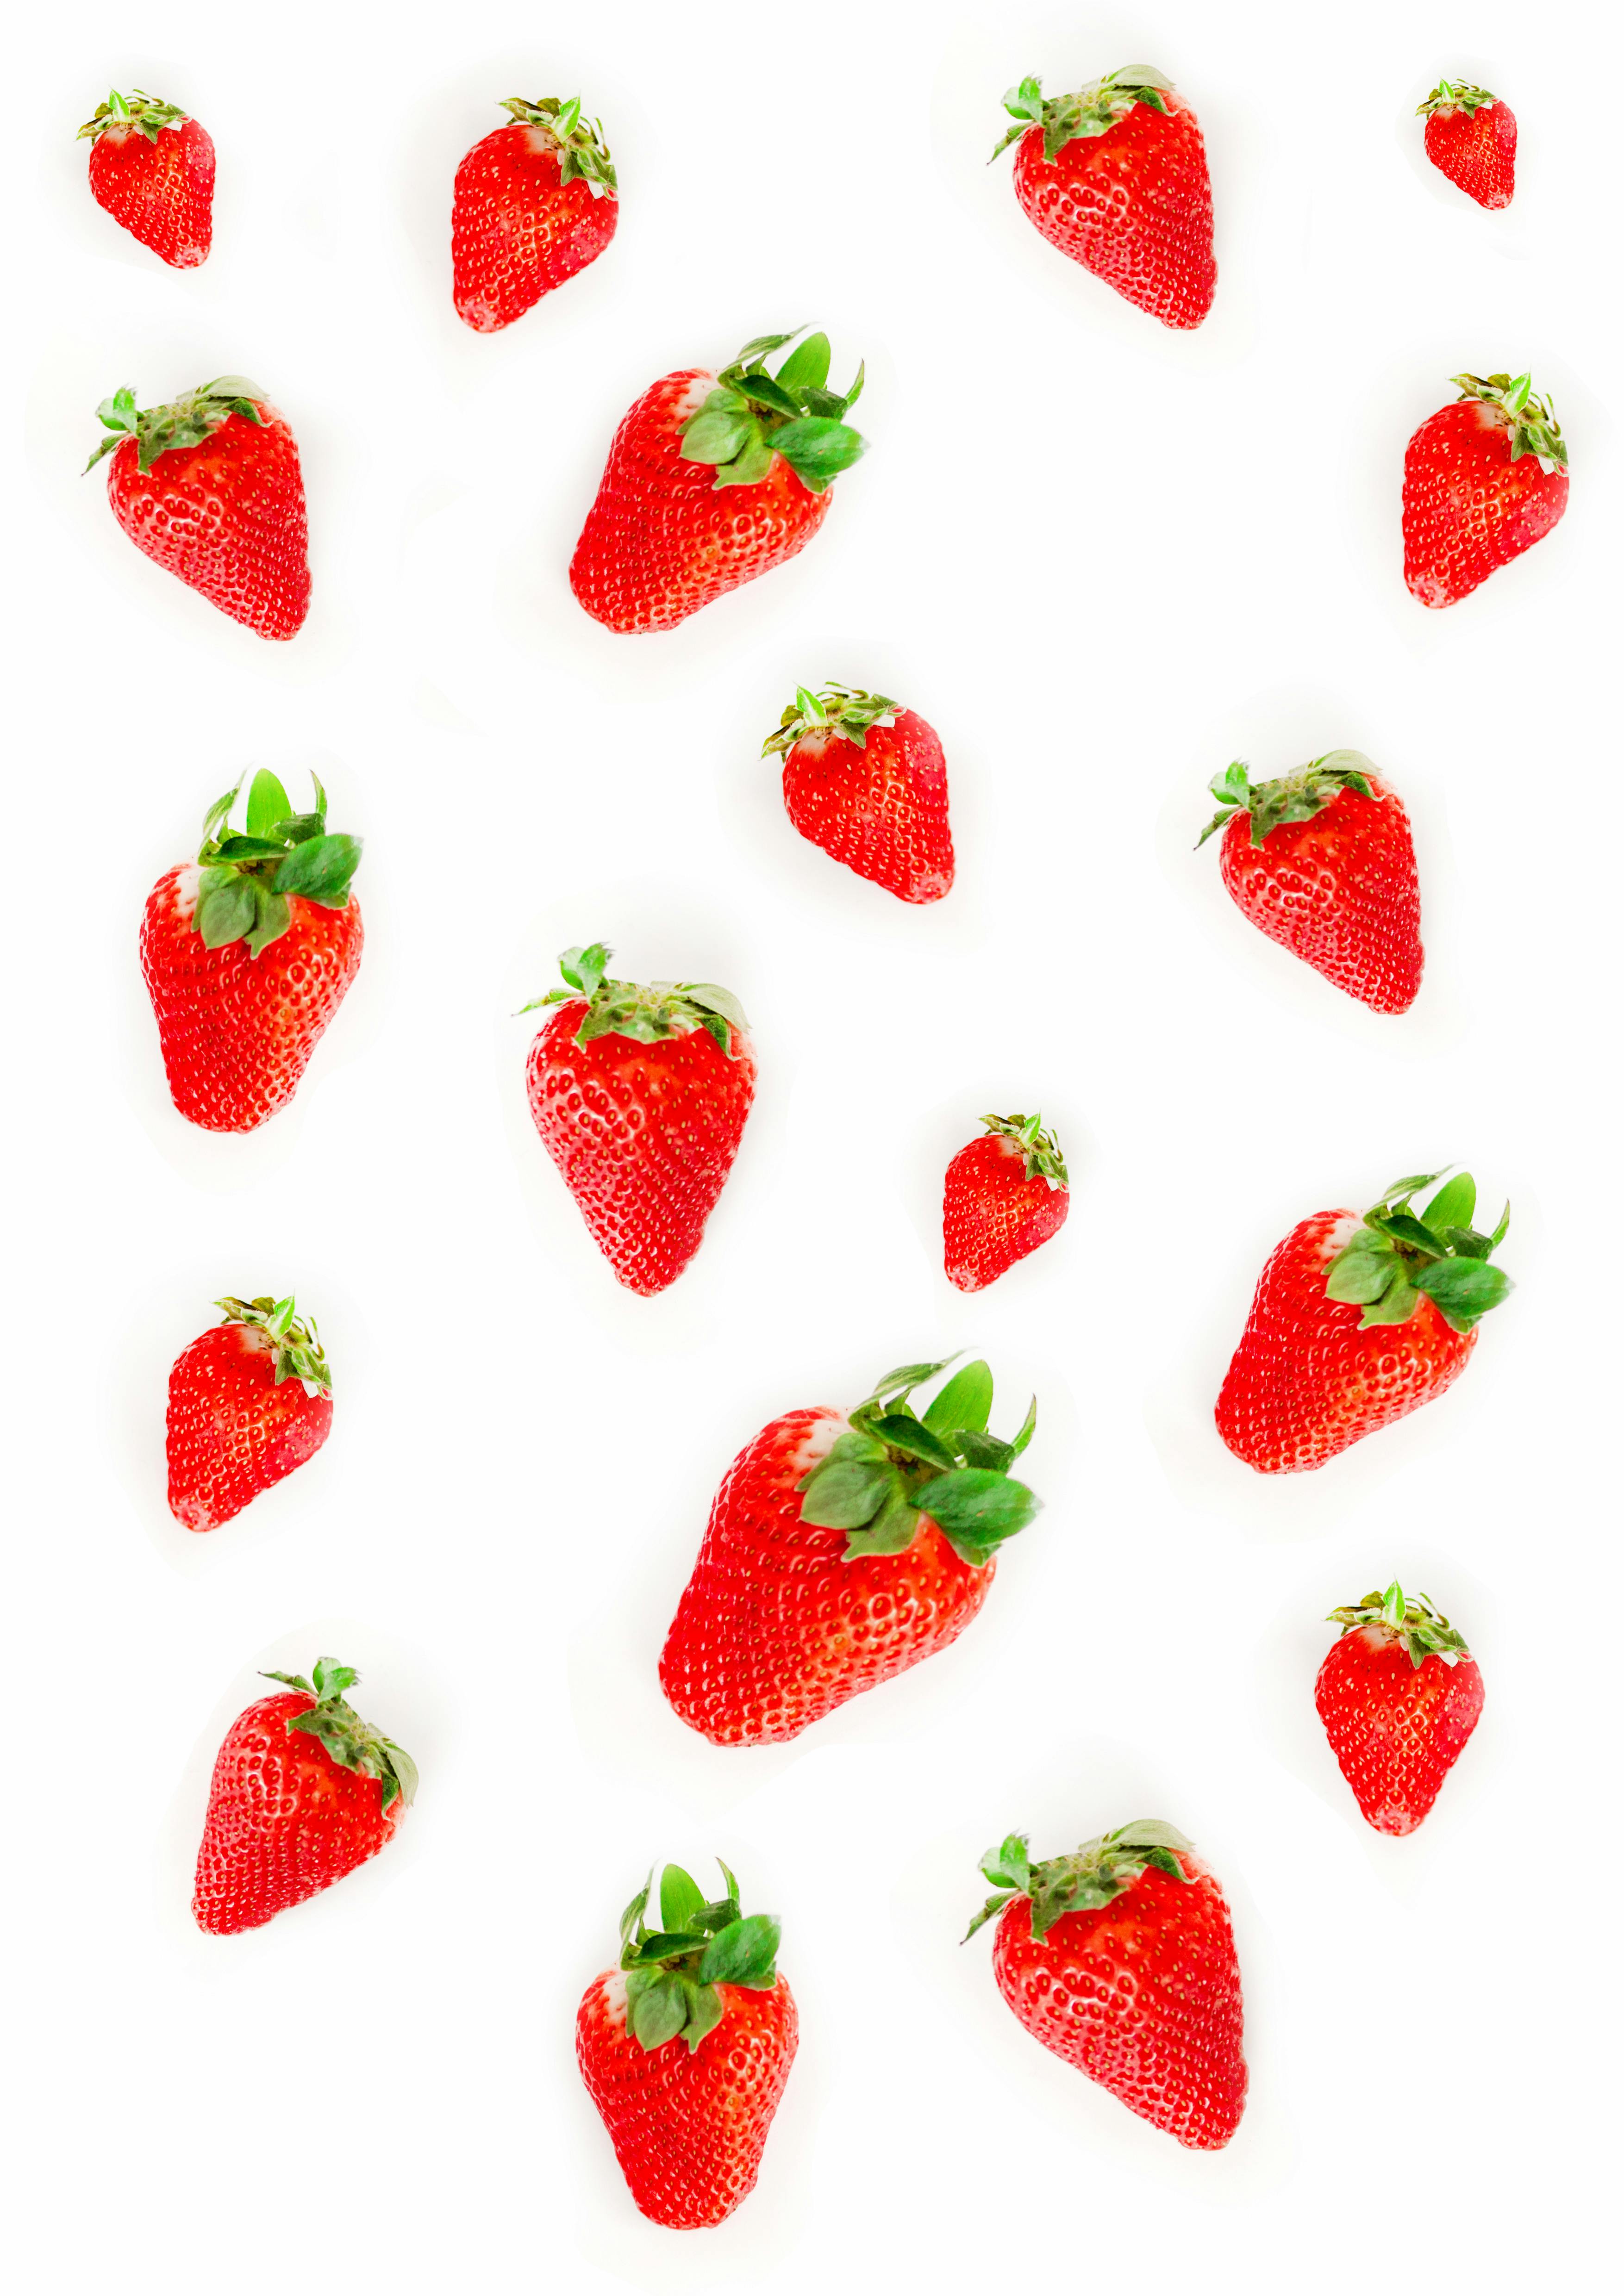 Wallpaper White Strawberry Background Wallpaper Image For Free Download   Pngtree